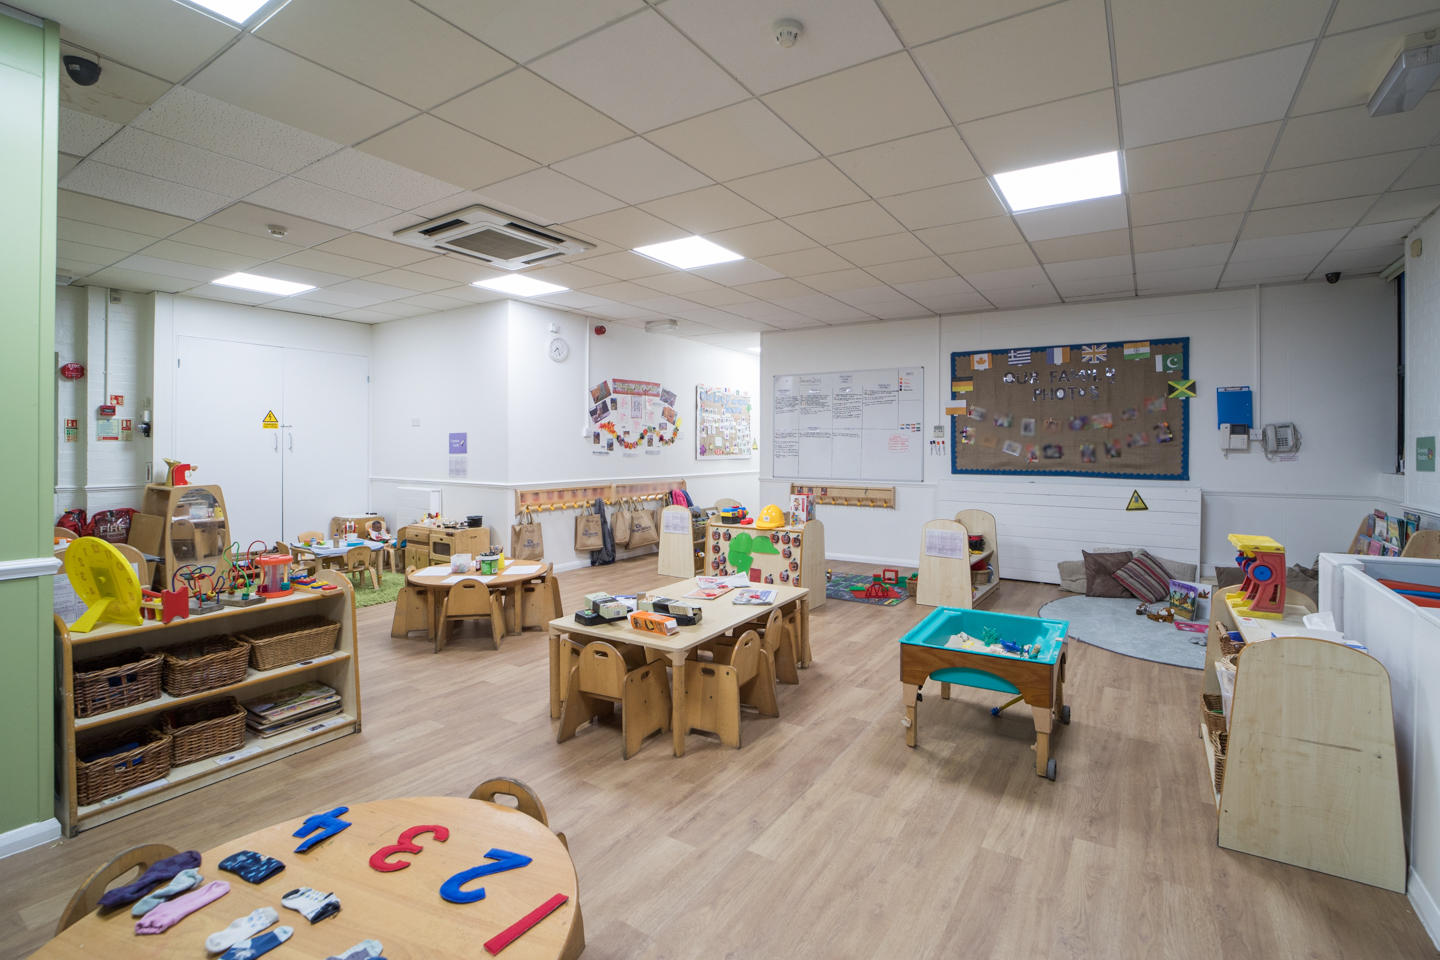 Bright Horizons Slough Day Nursery and Preschool (Closed) Slough 03300 571706